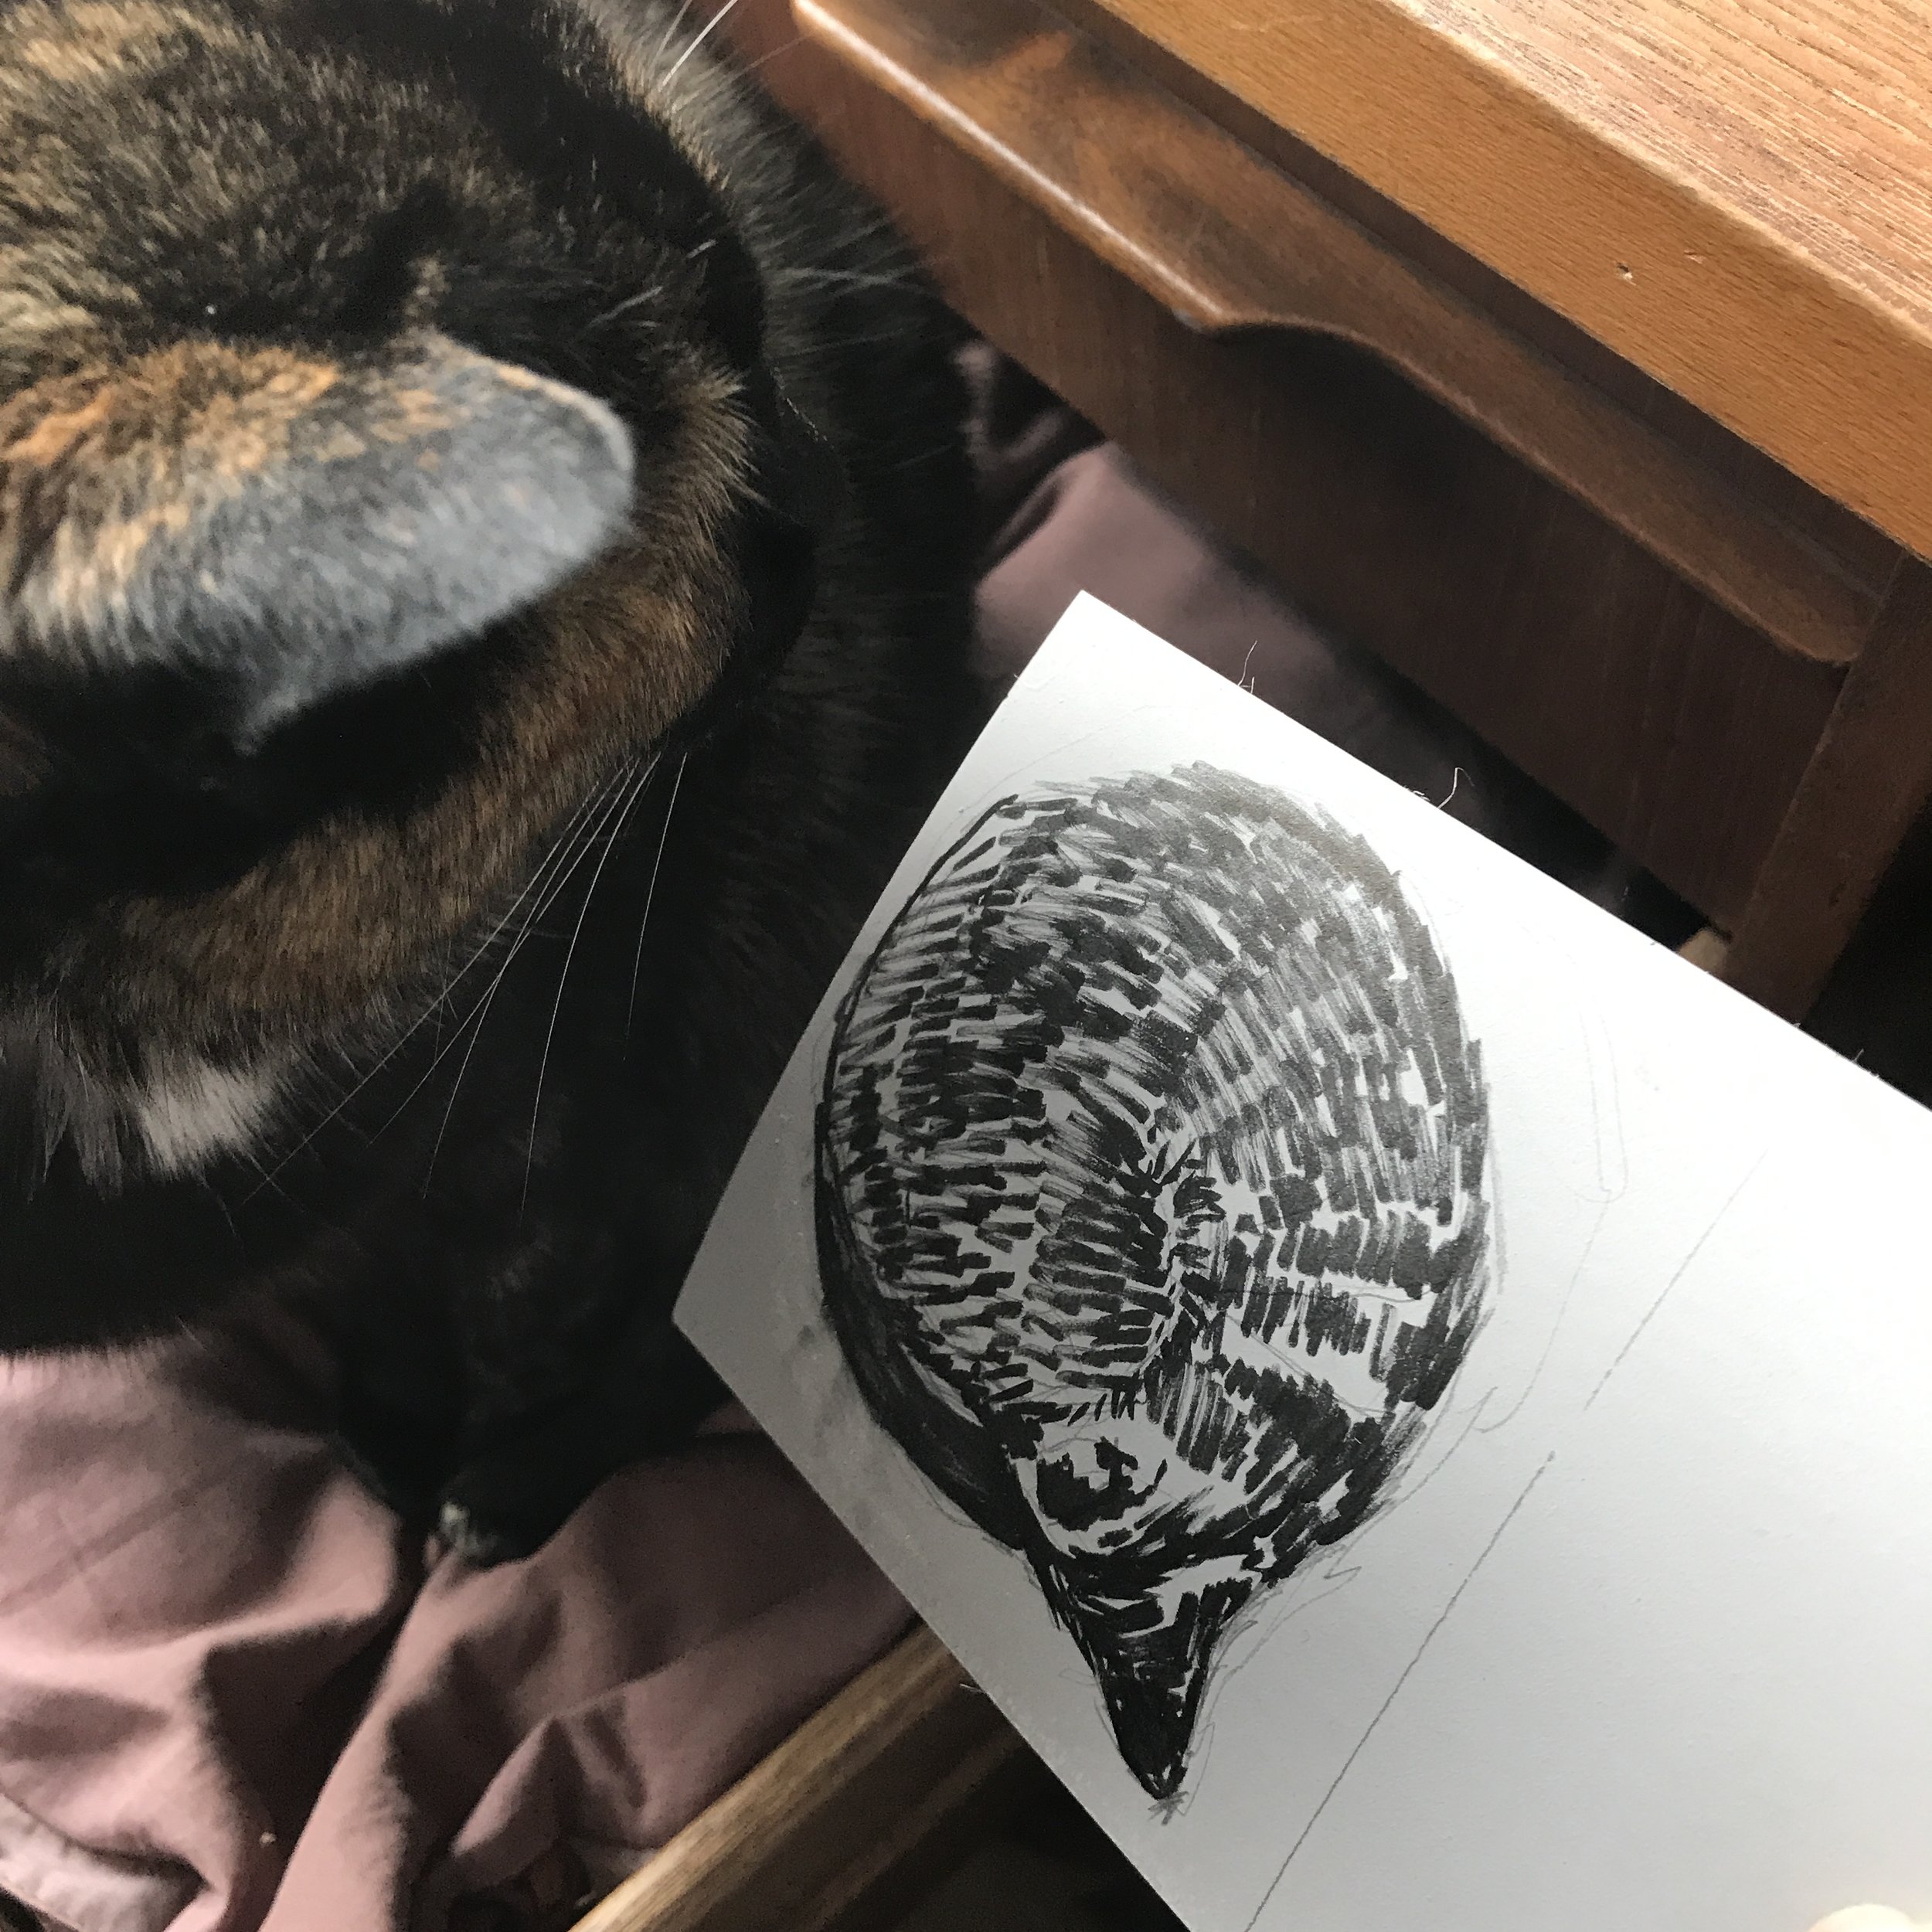 Showing Meg my drawing